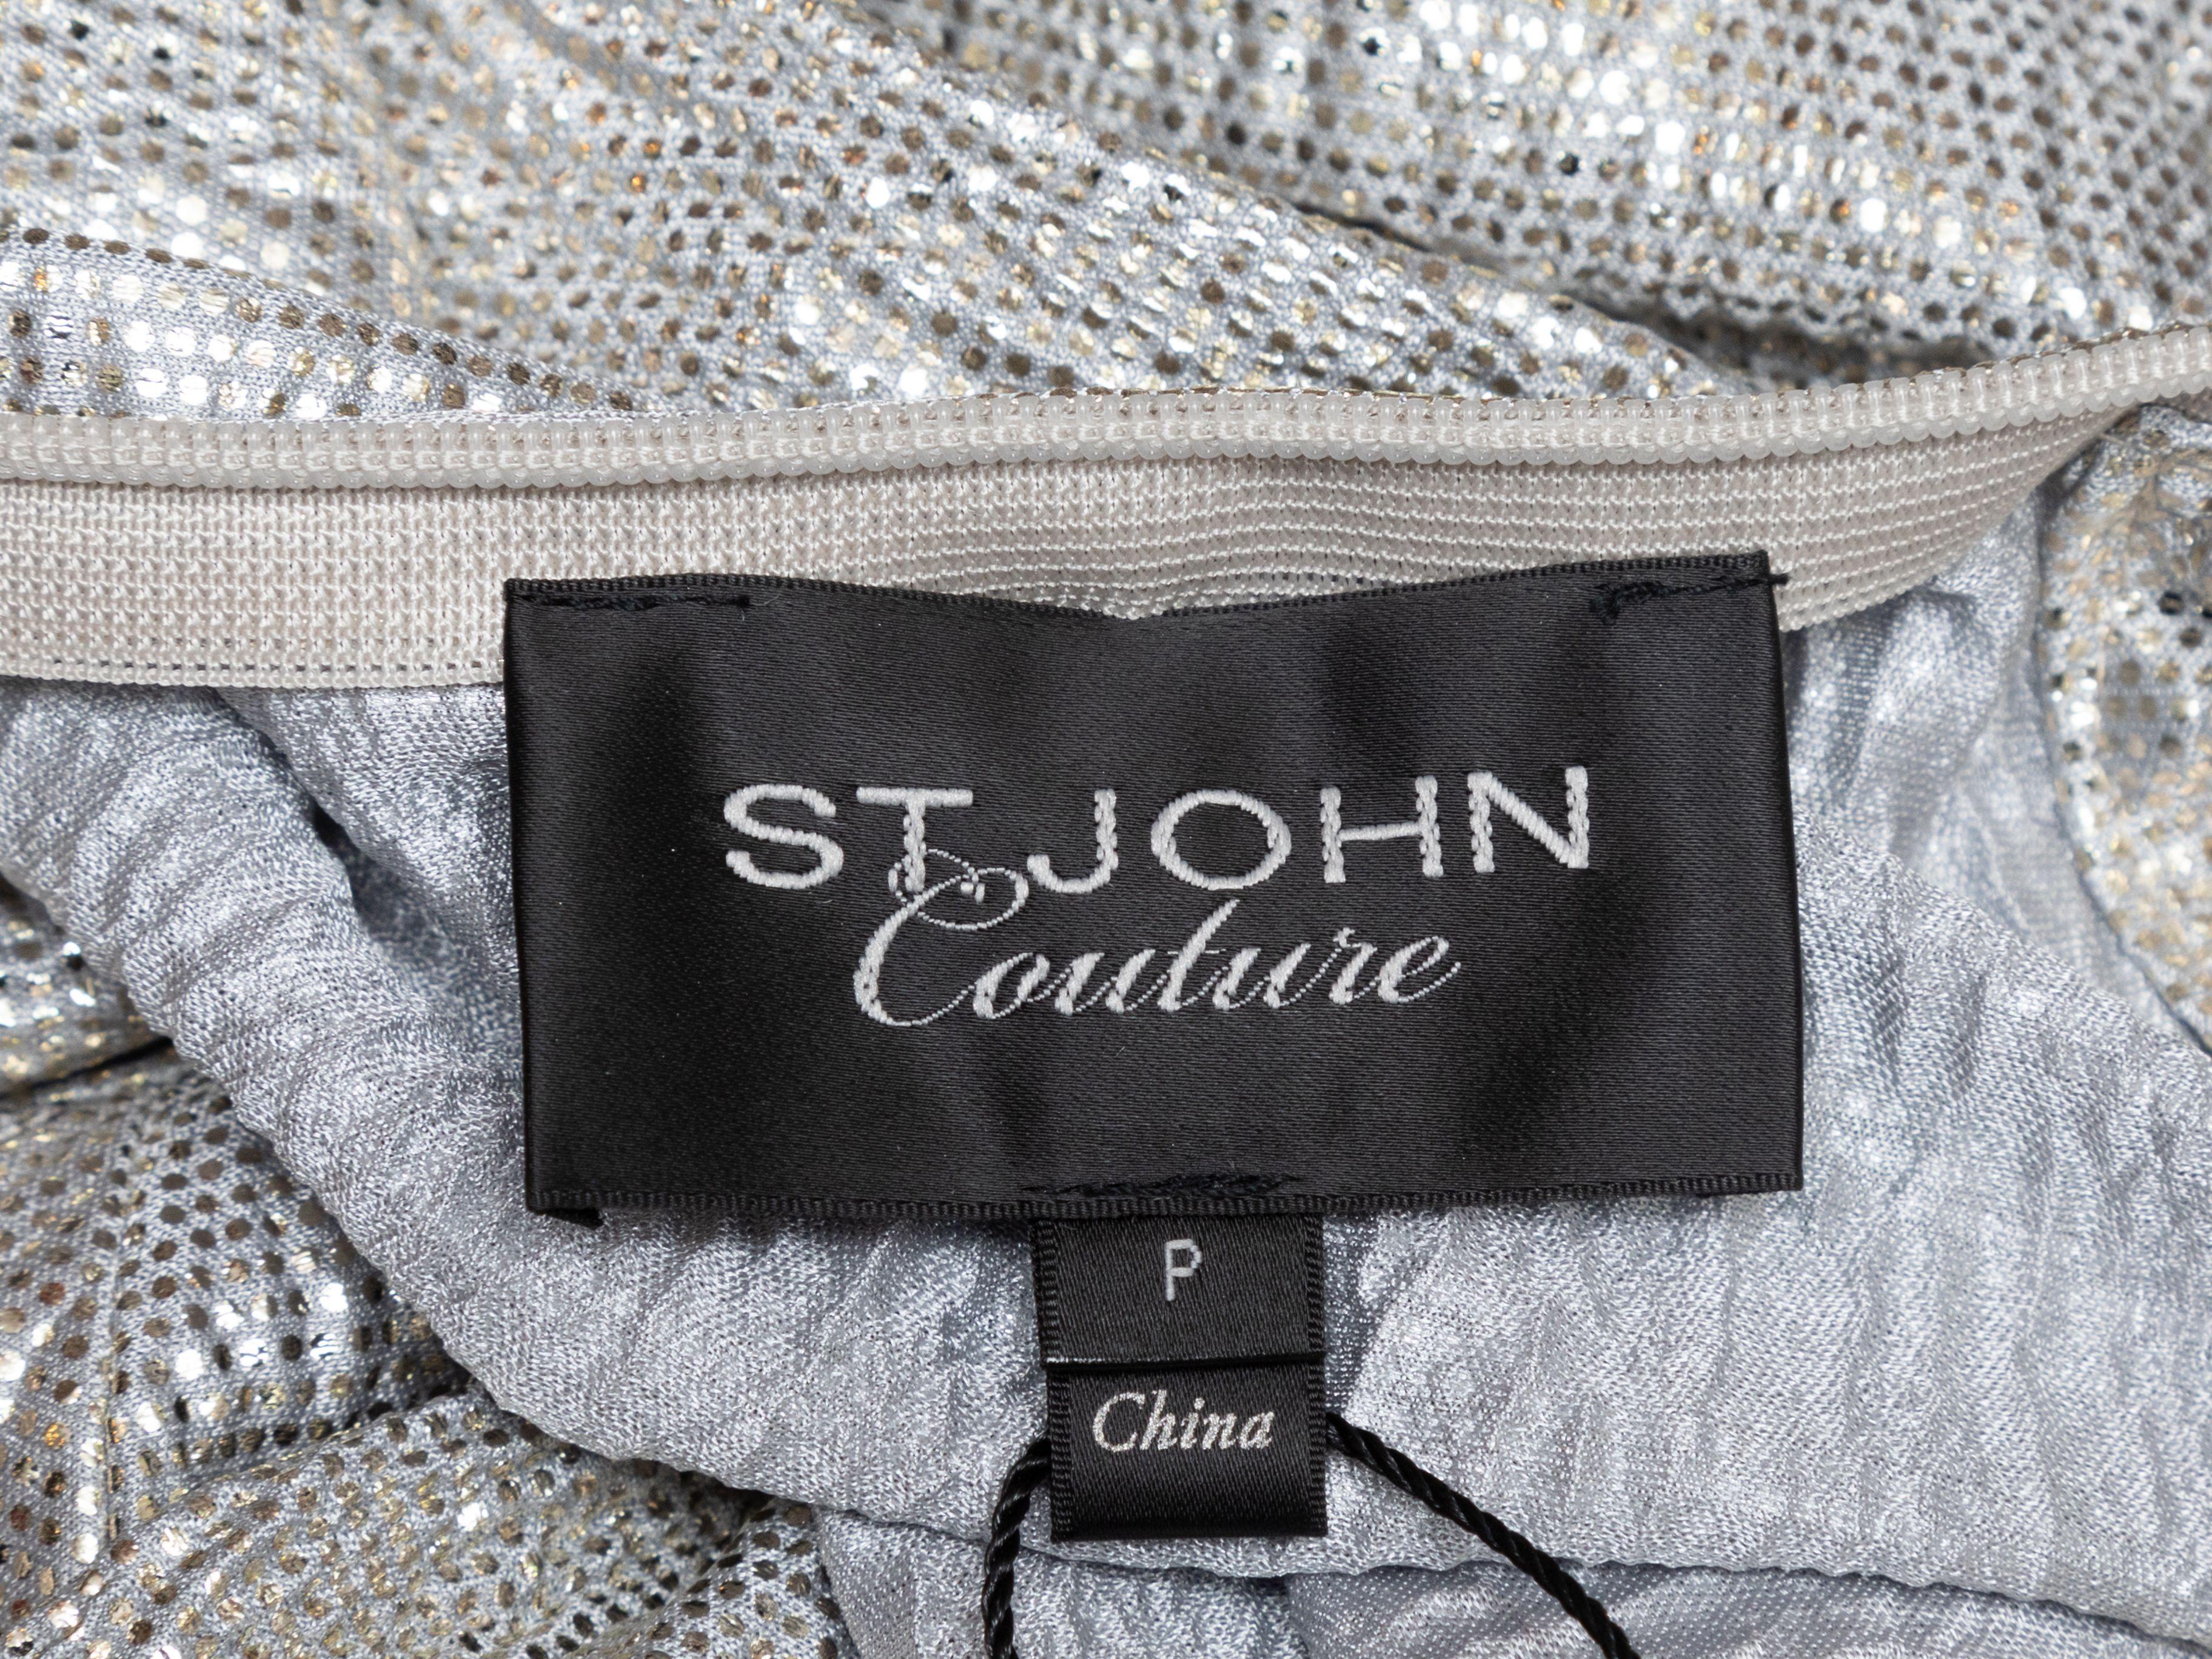 Product Details: Silver metallic long sleeve top by St. John. Pussy bow accent at neck. Zip closure at center back. Designer size P. 34